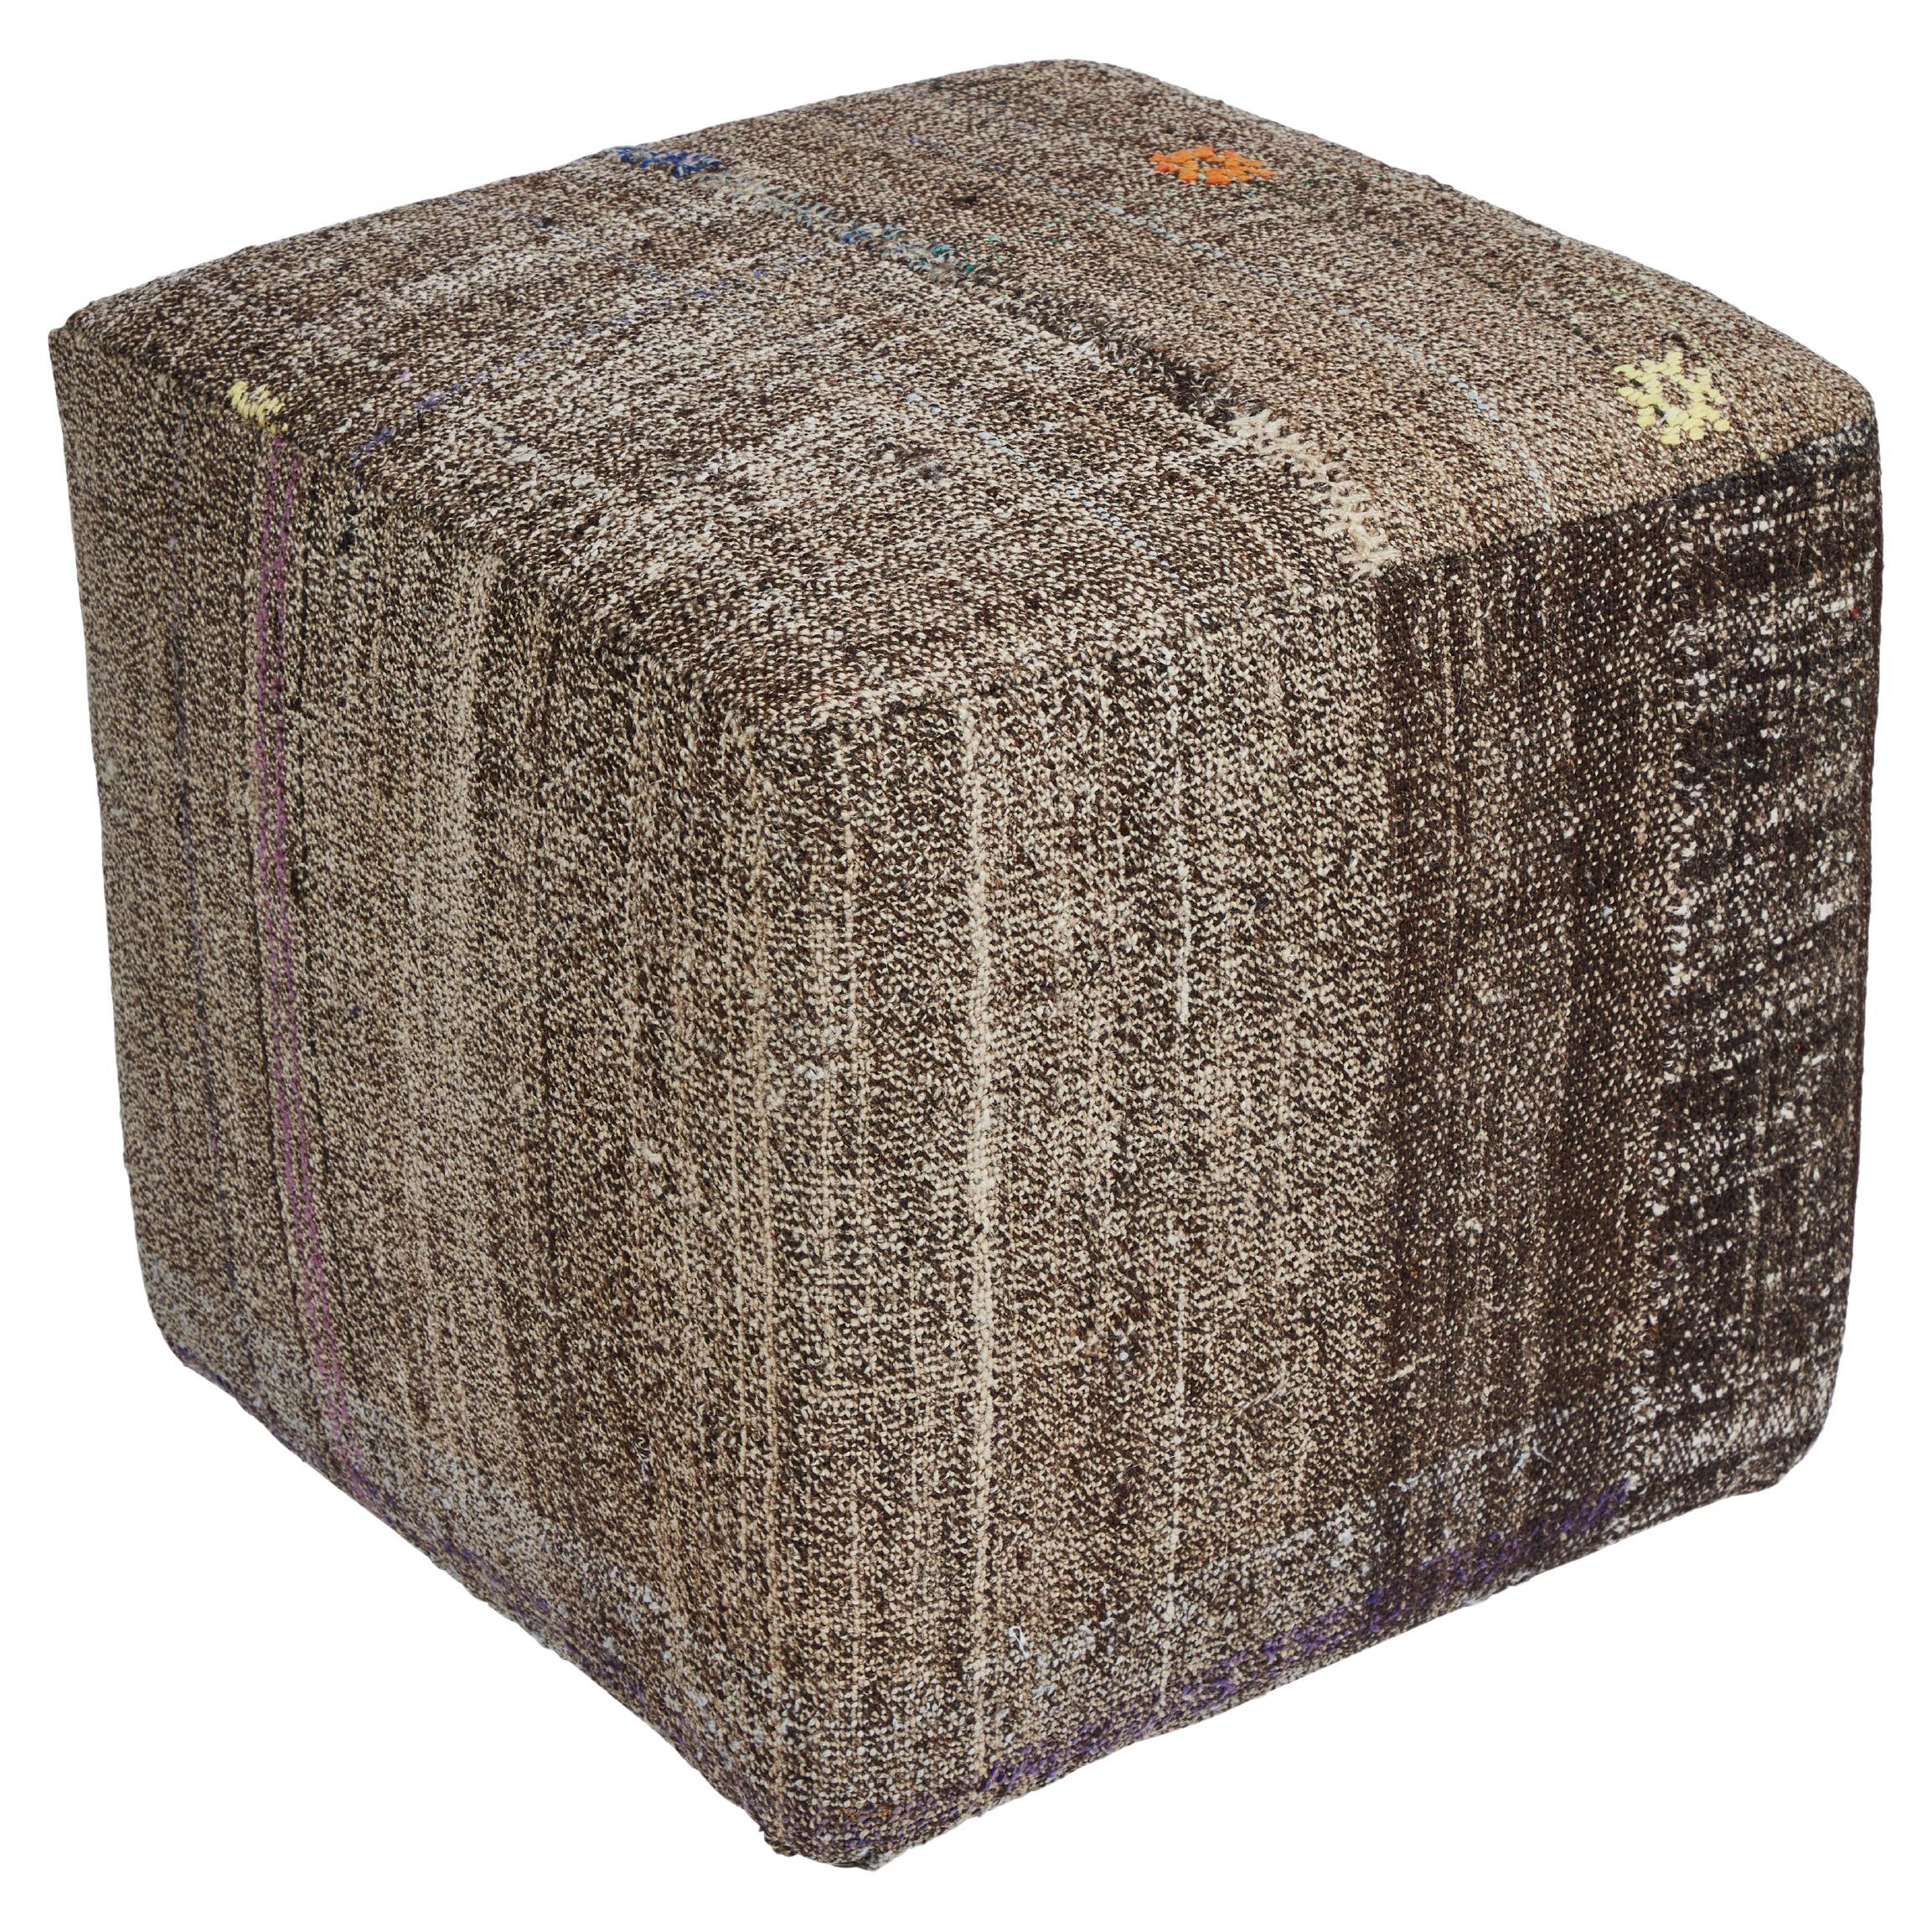 Custom Cube Stool, Newly Upholstered in a Vintage Wool Rug